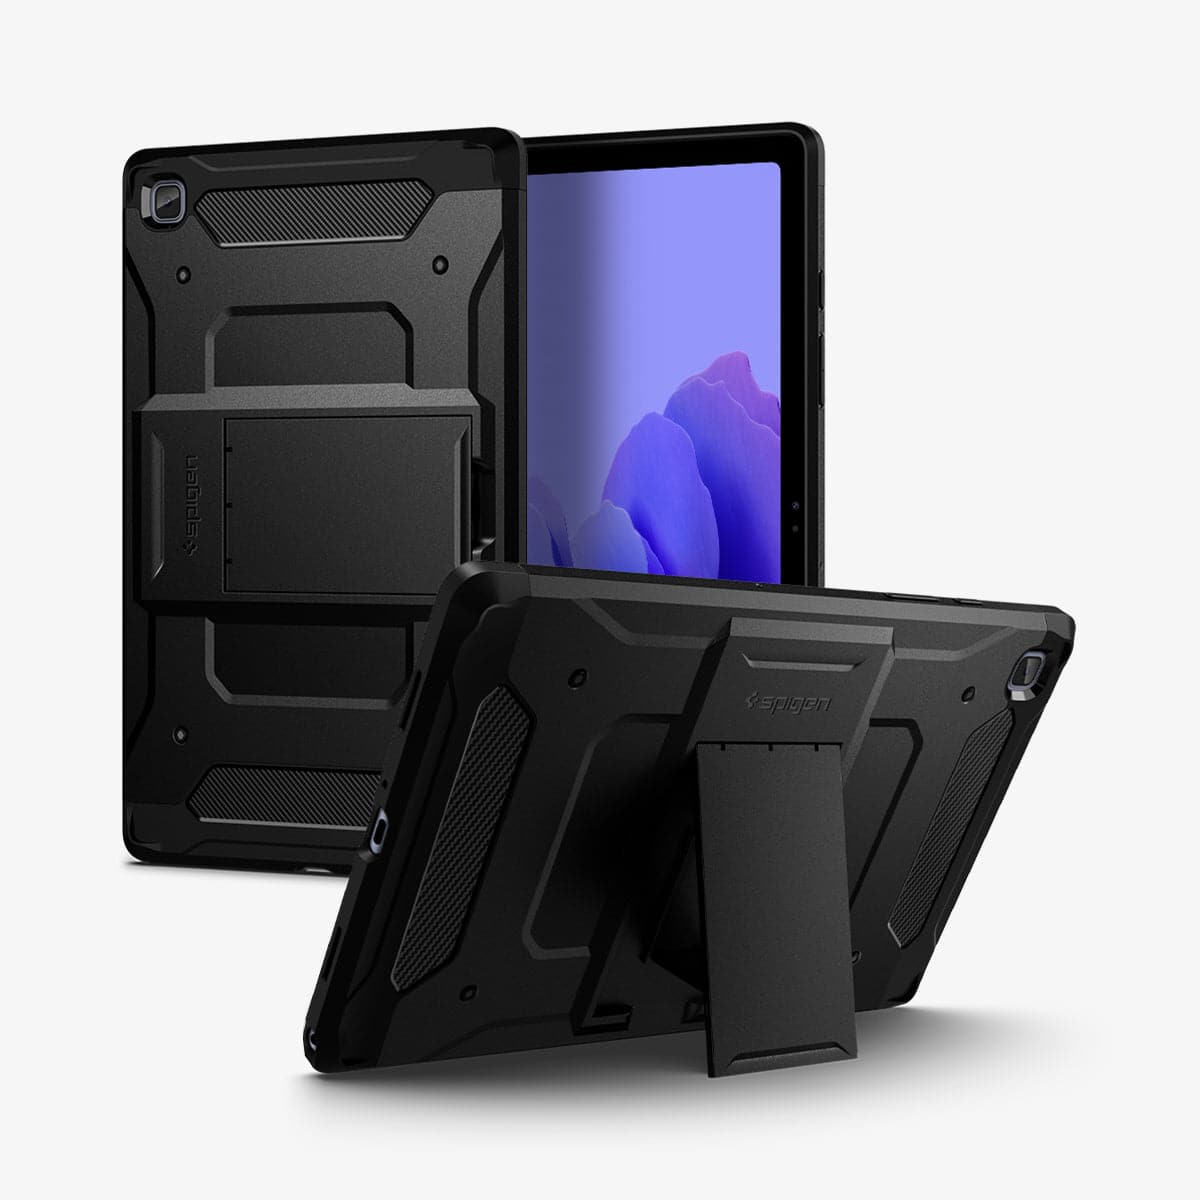 ACS01564 - Galaxy Tab A7 Case Tough Armor Pro in black showing the back, front and device propped up by built in kickstand